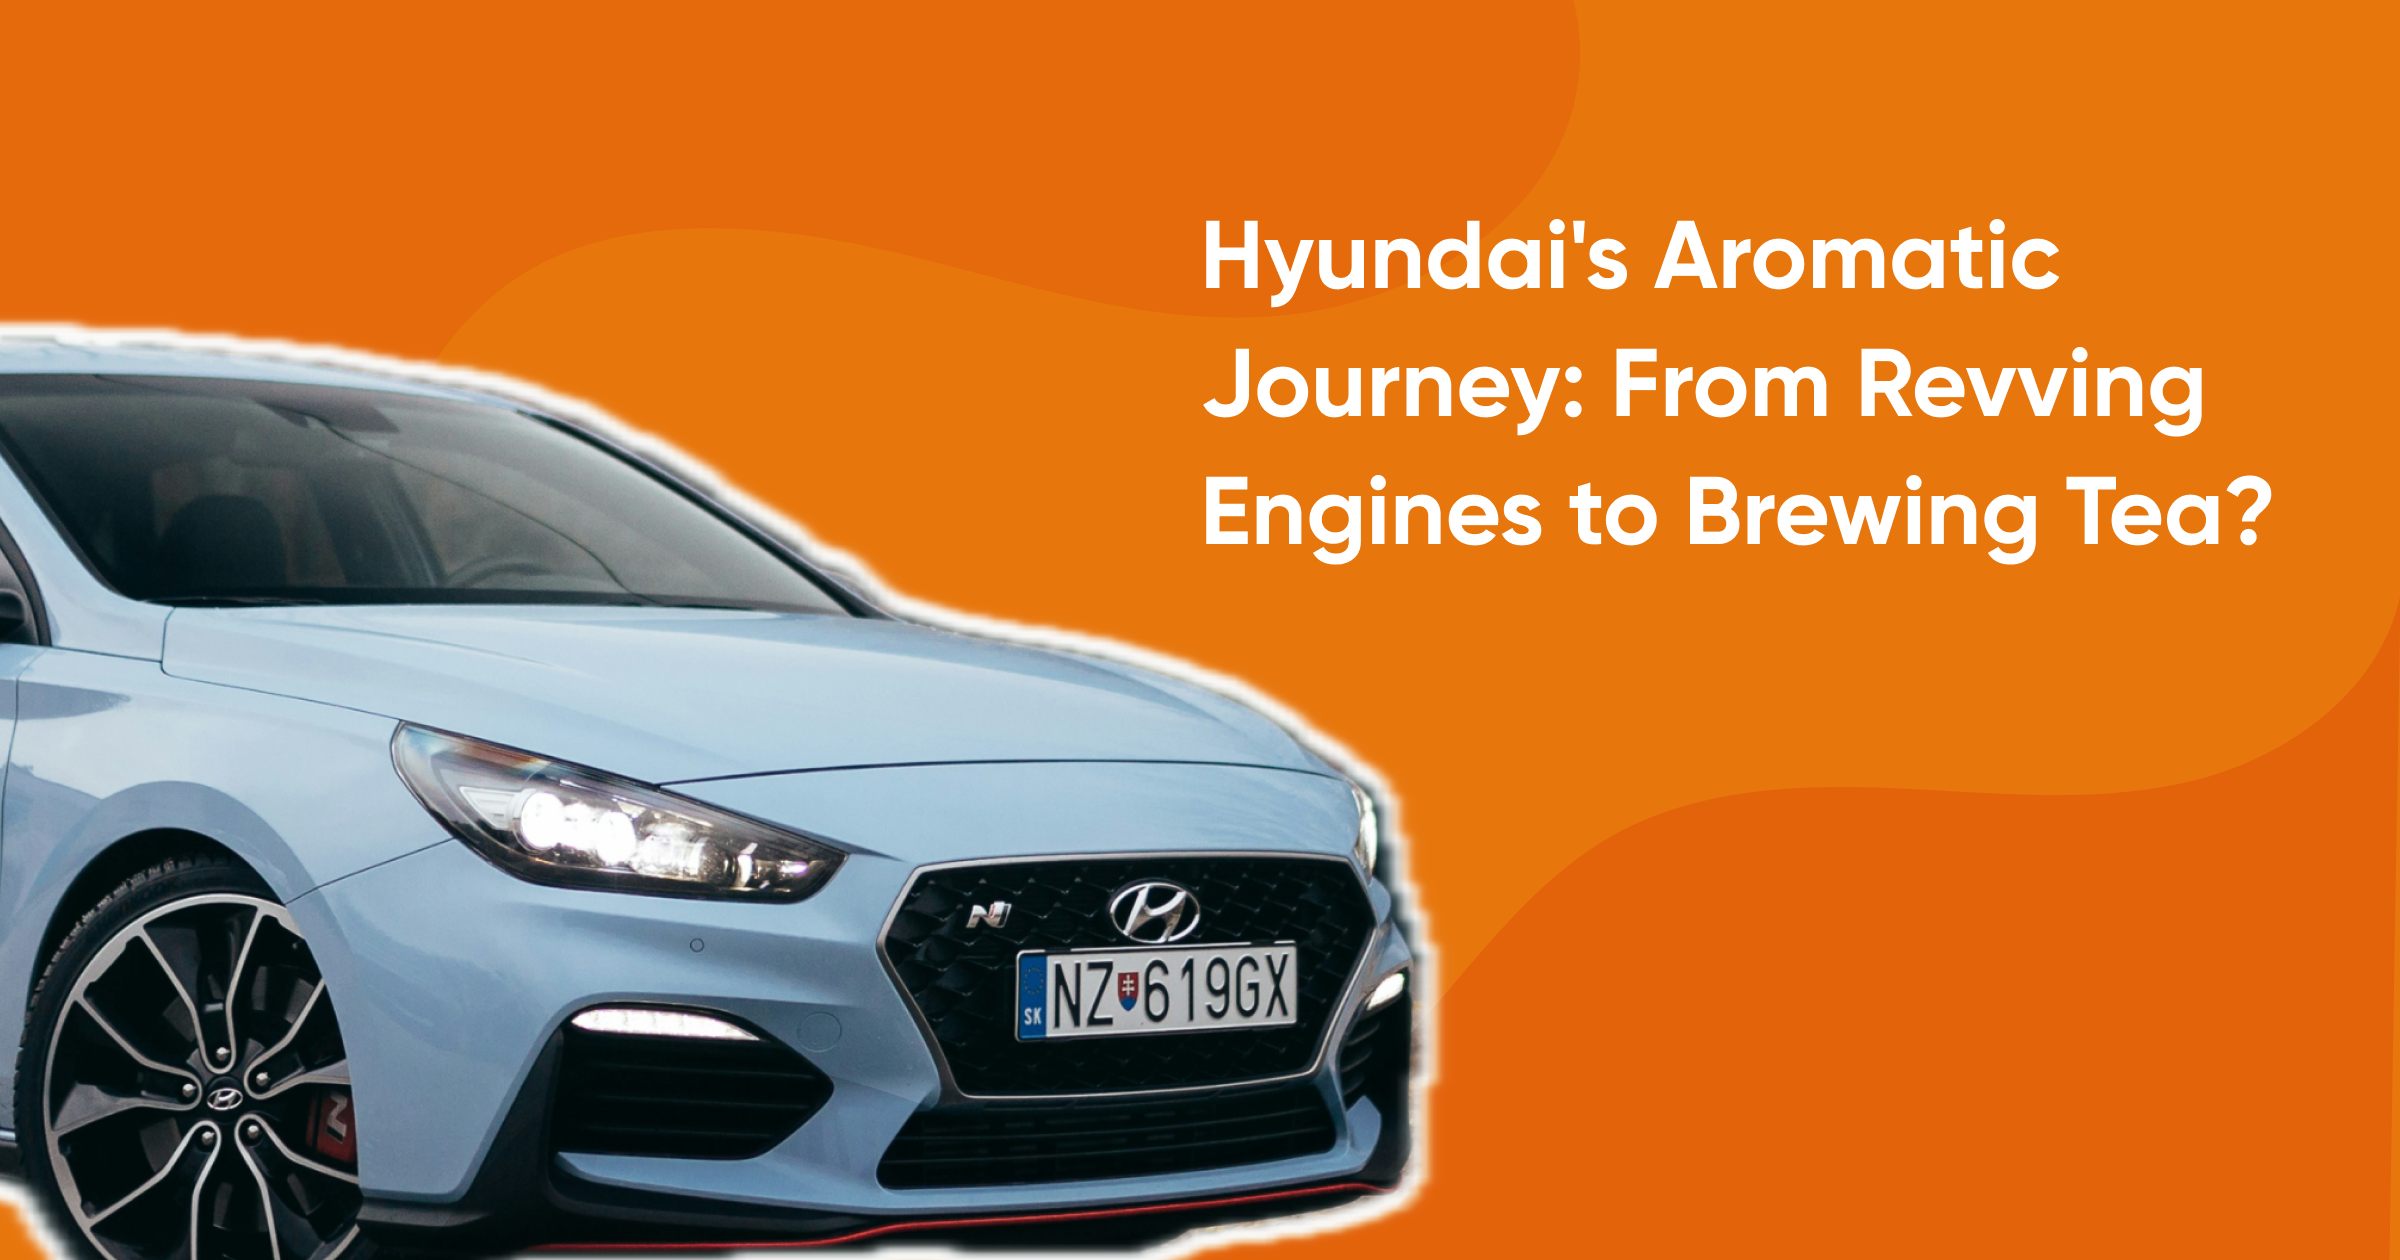 Hyundai's Aromatic Journey: From Revving Engines to Brewing Tea?